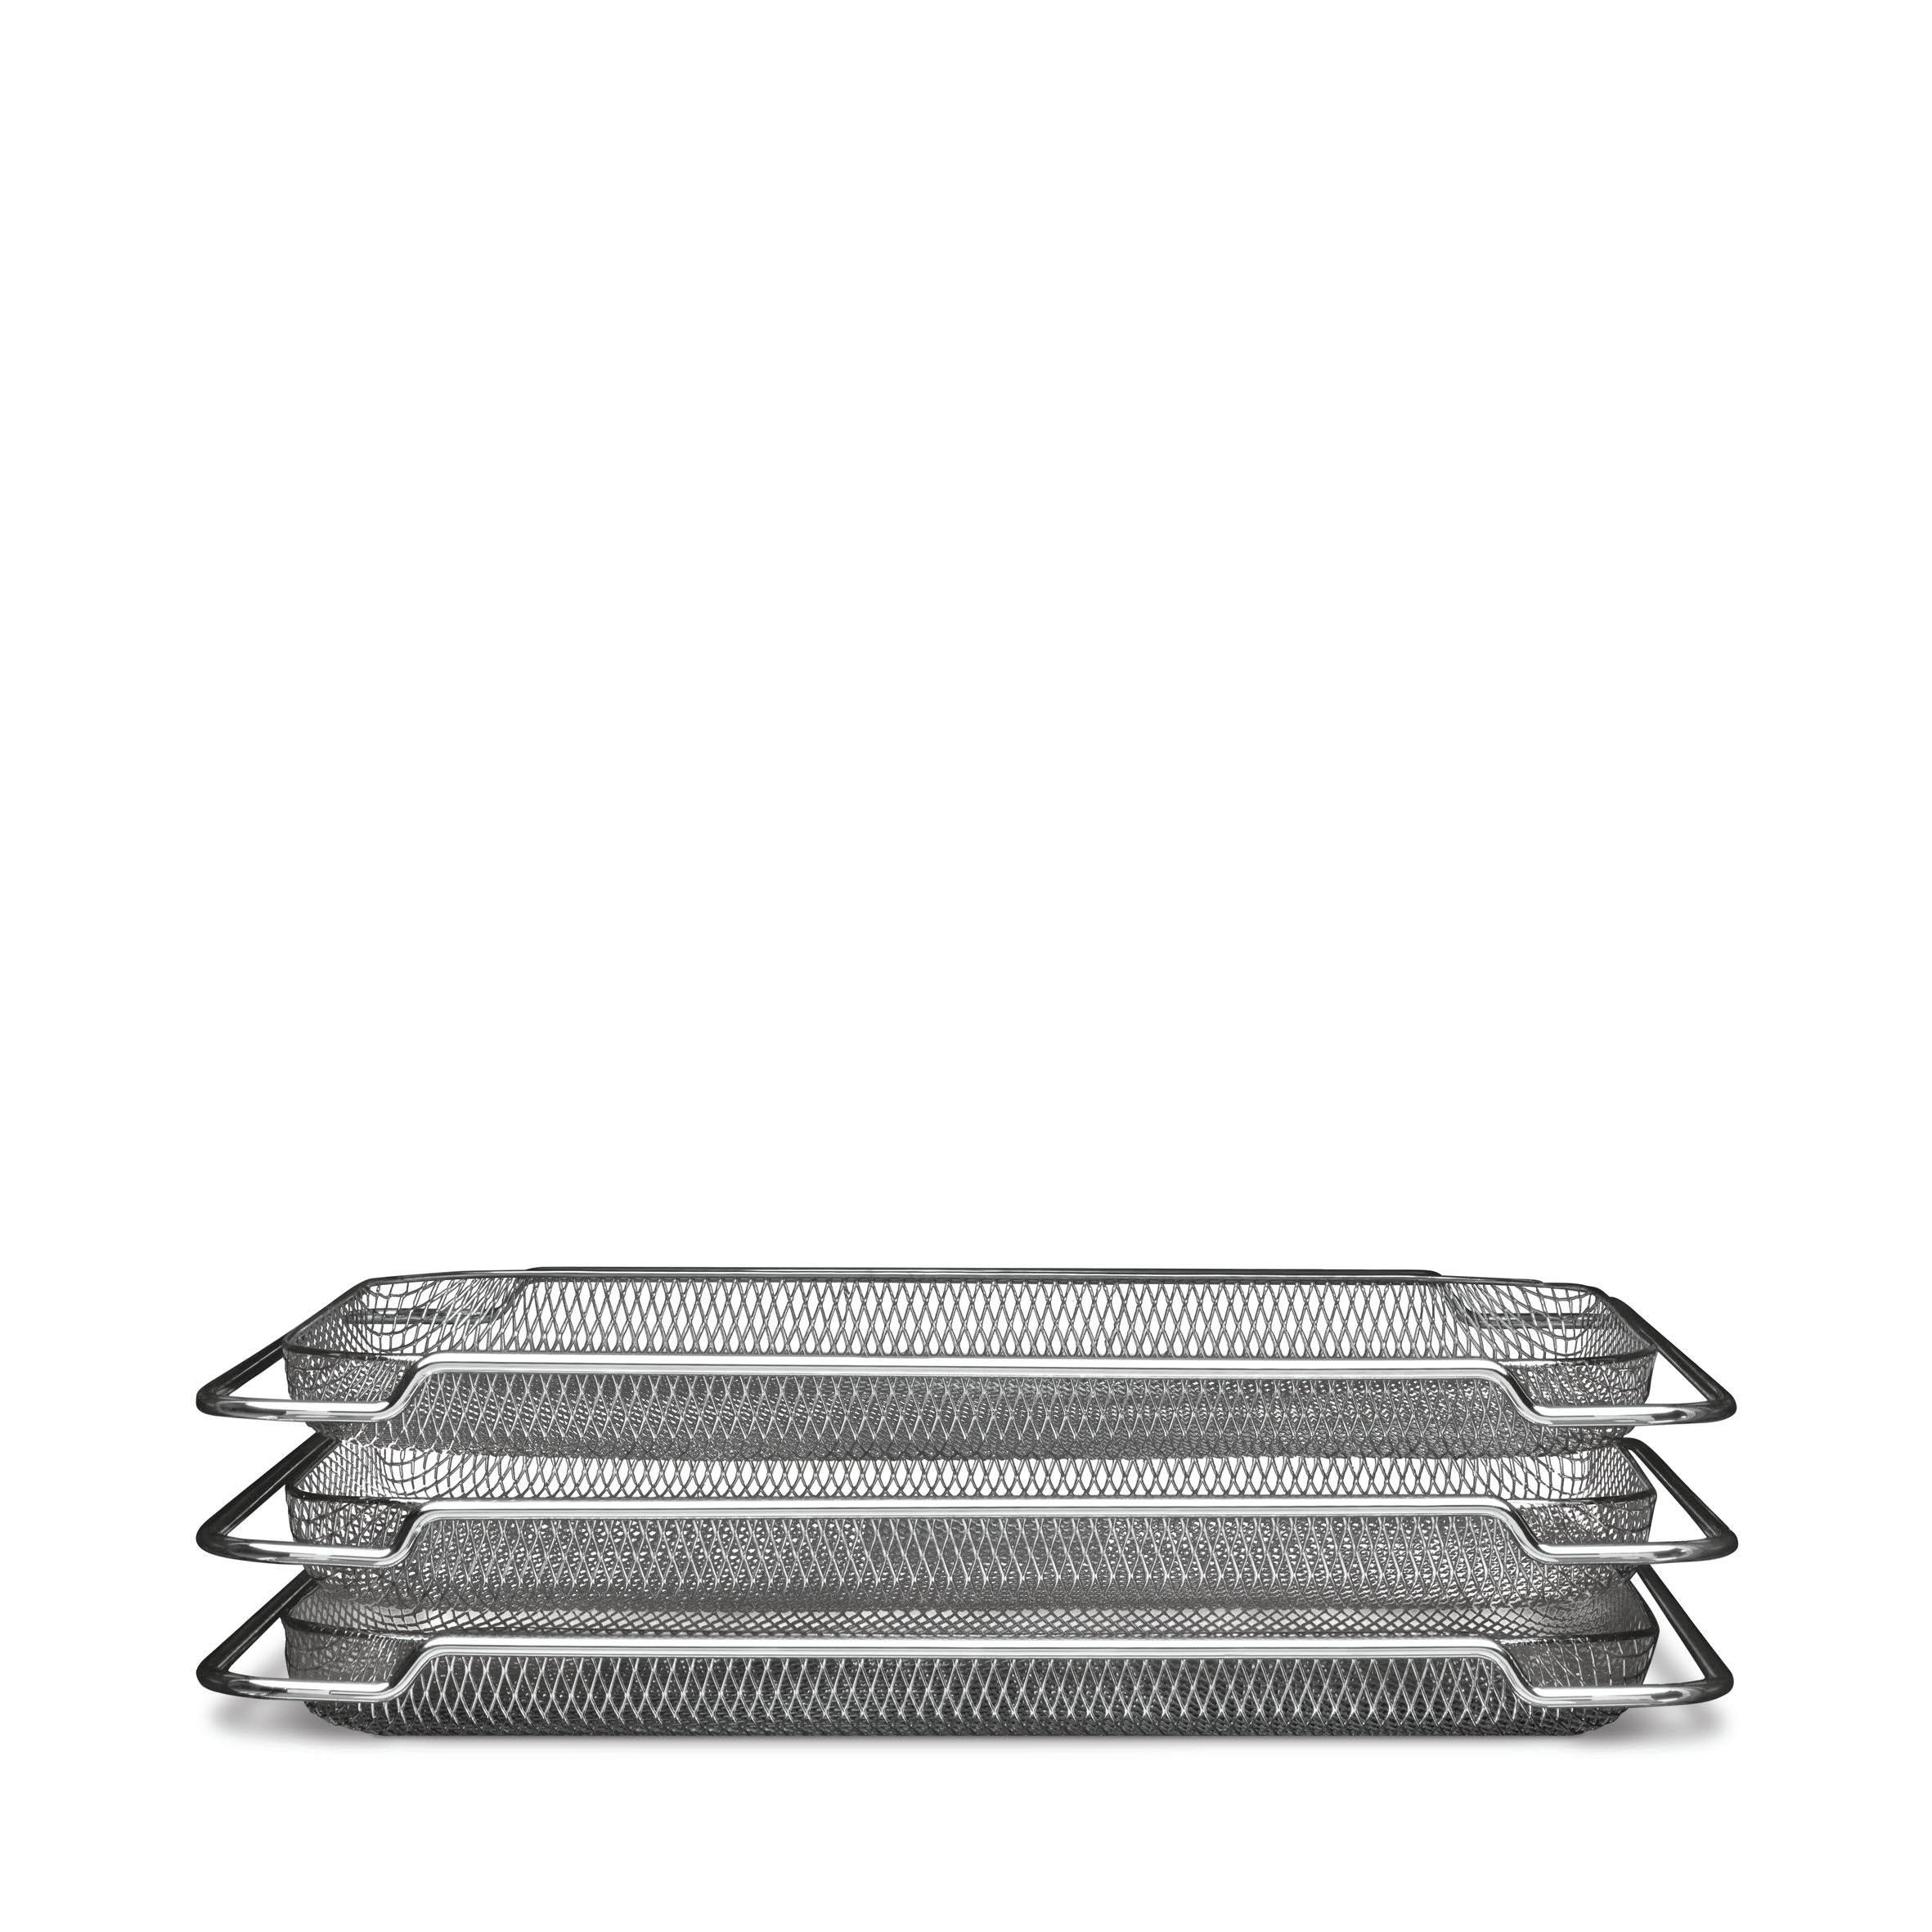 Breville The Mesh Baskets for Smart Oven Air